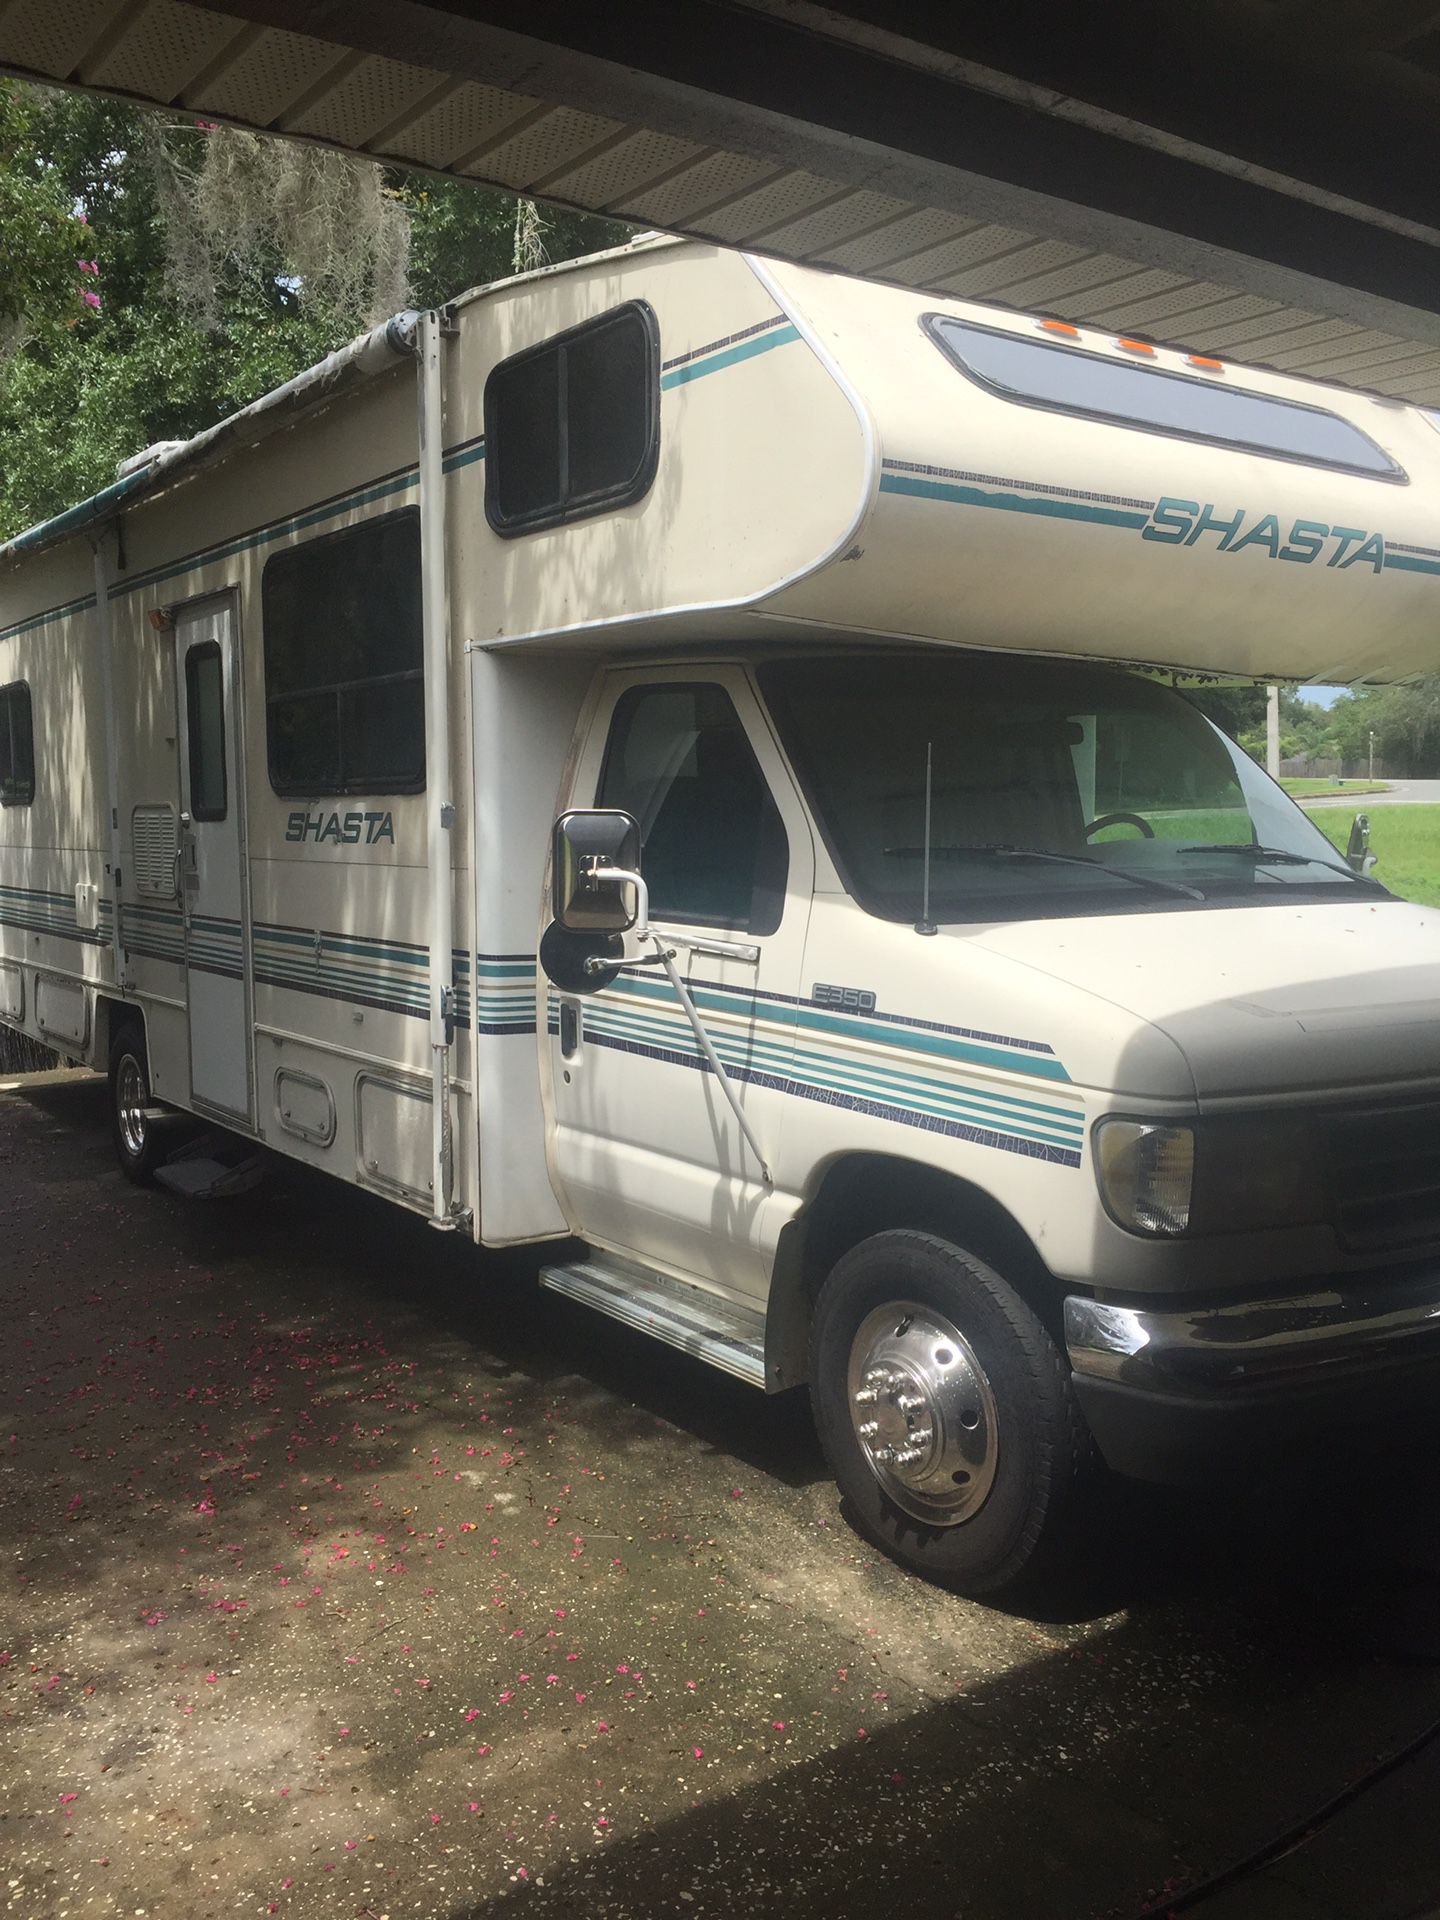 1993 29’ class c Shasta motor home for sale